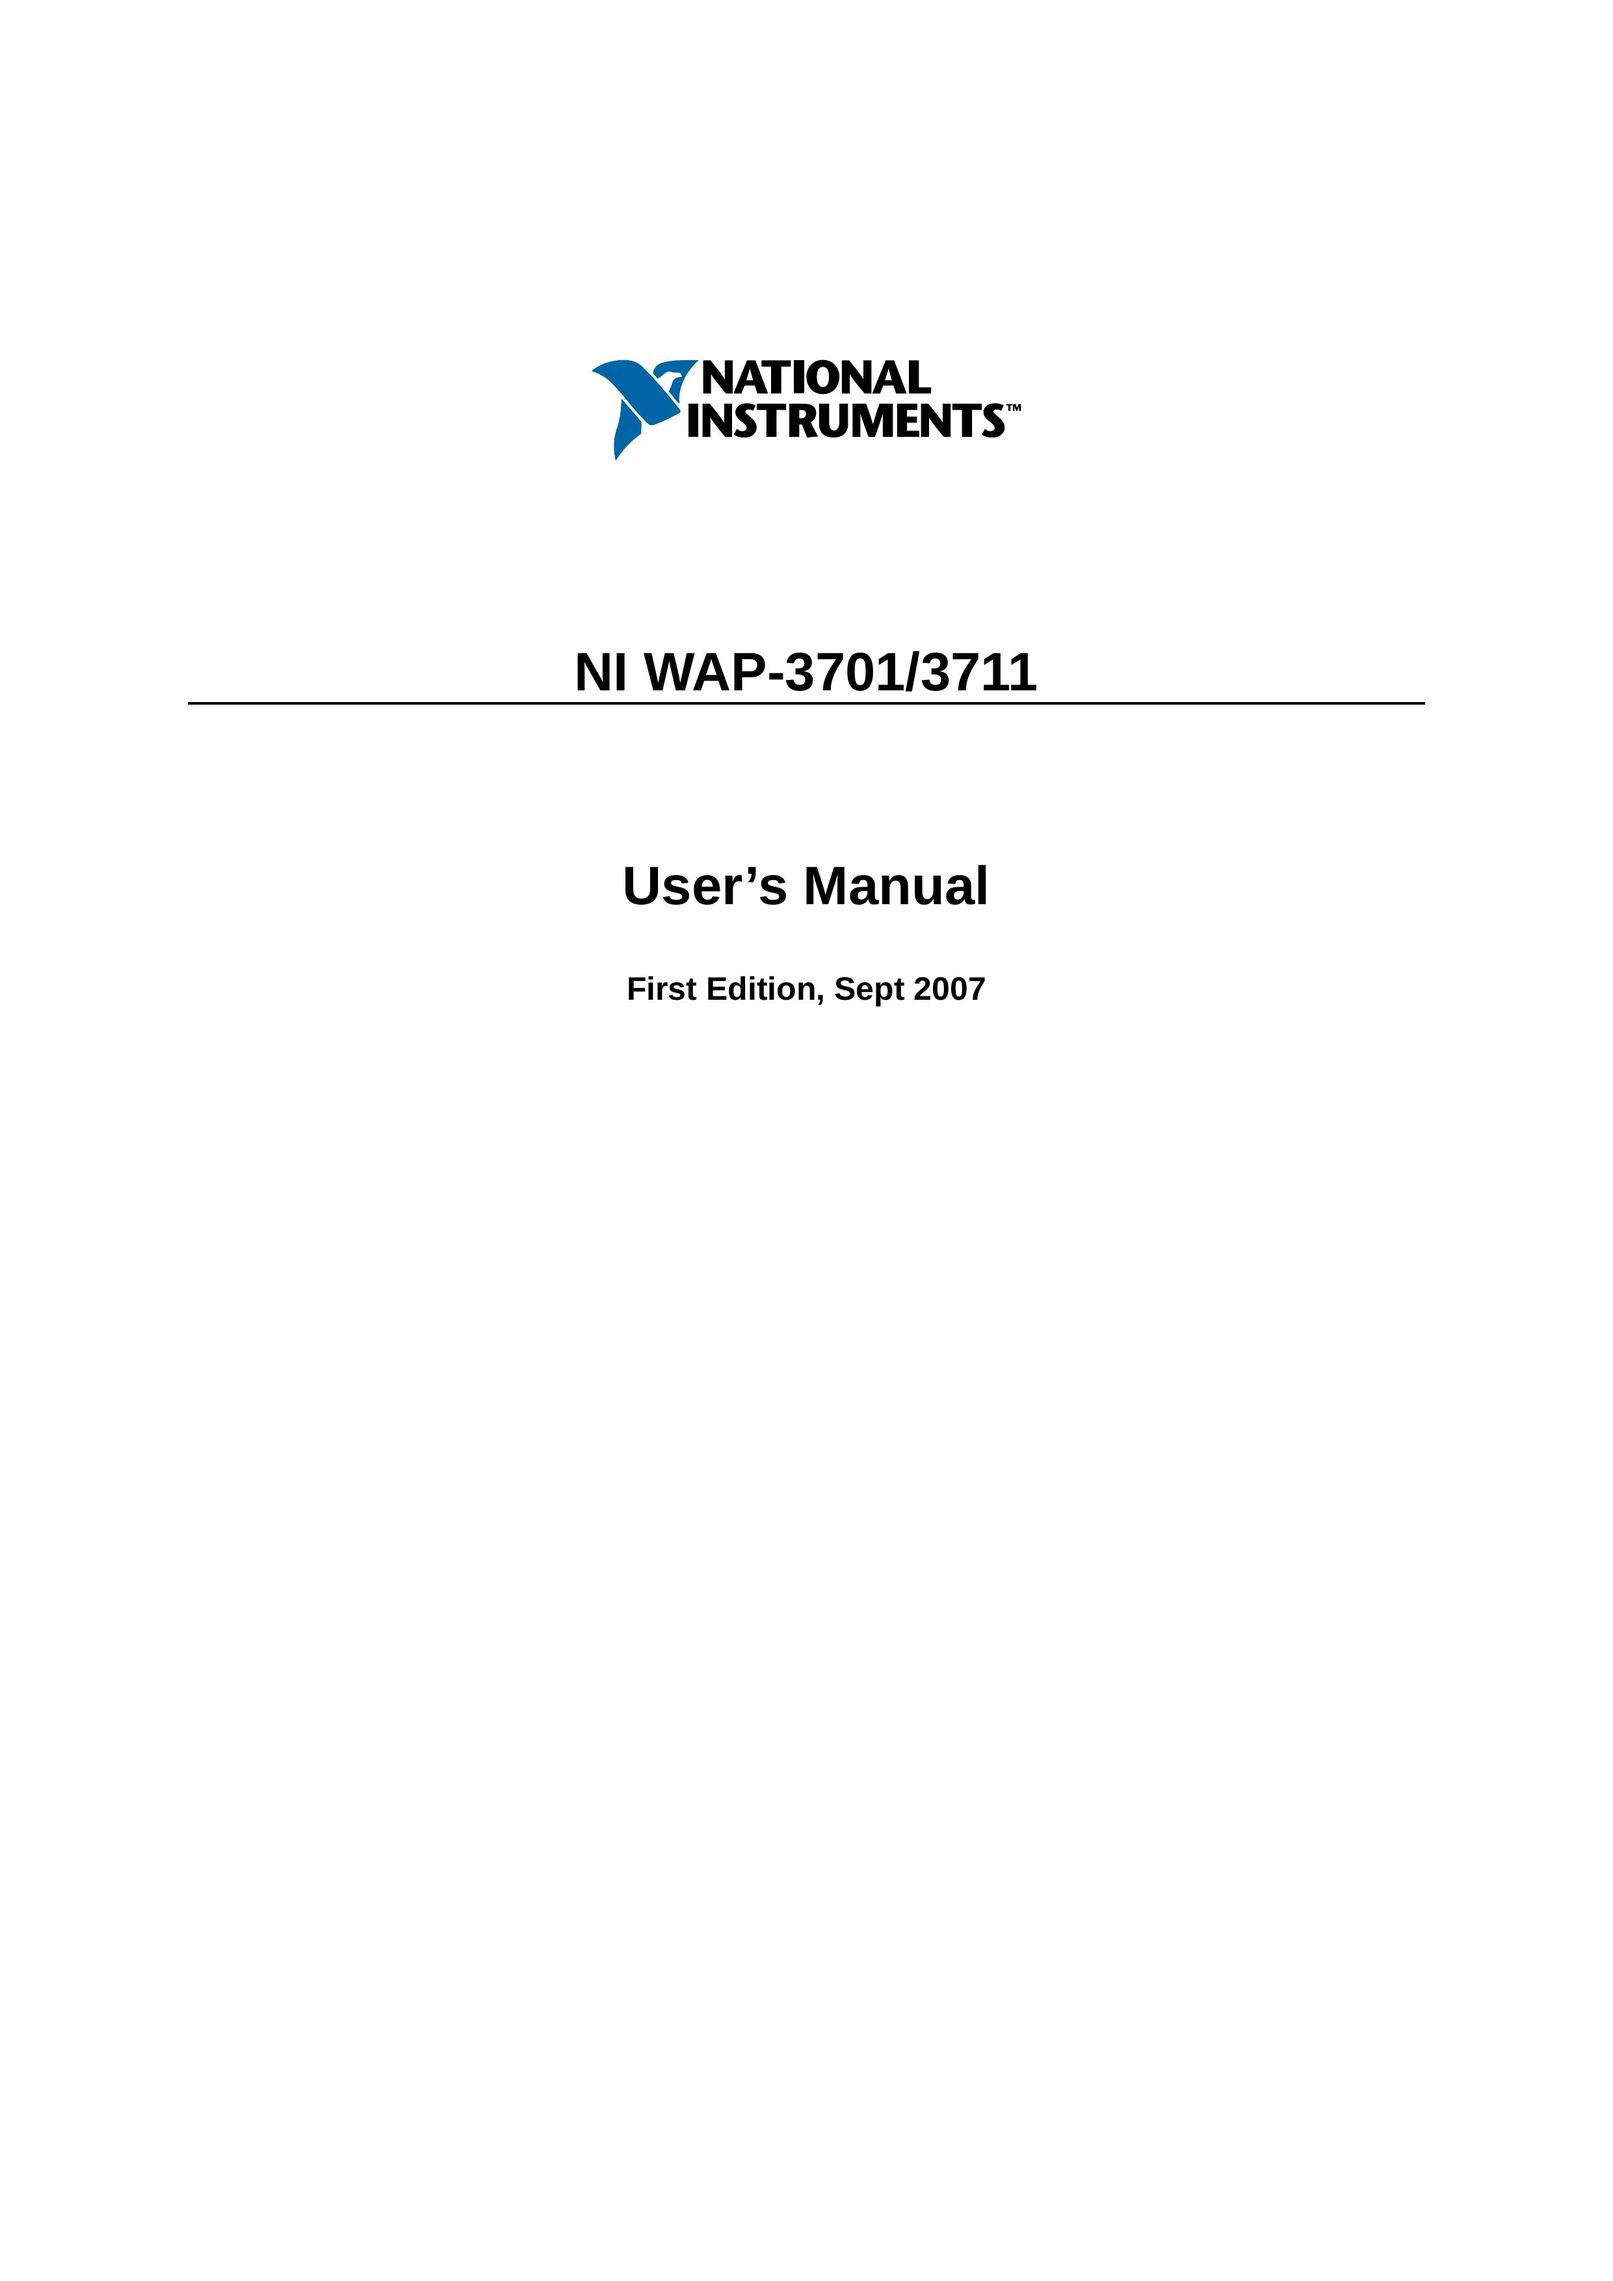 National Instruments WAP-3701 Network Router User Manual